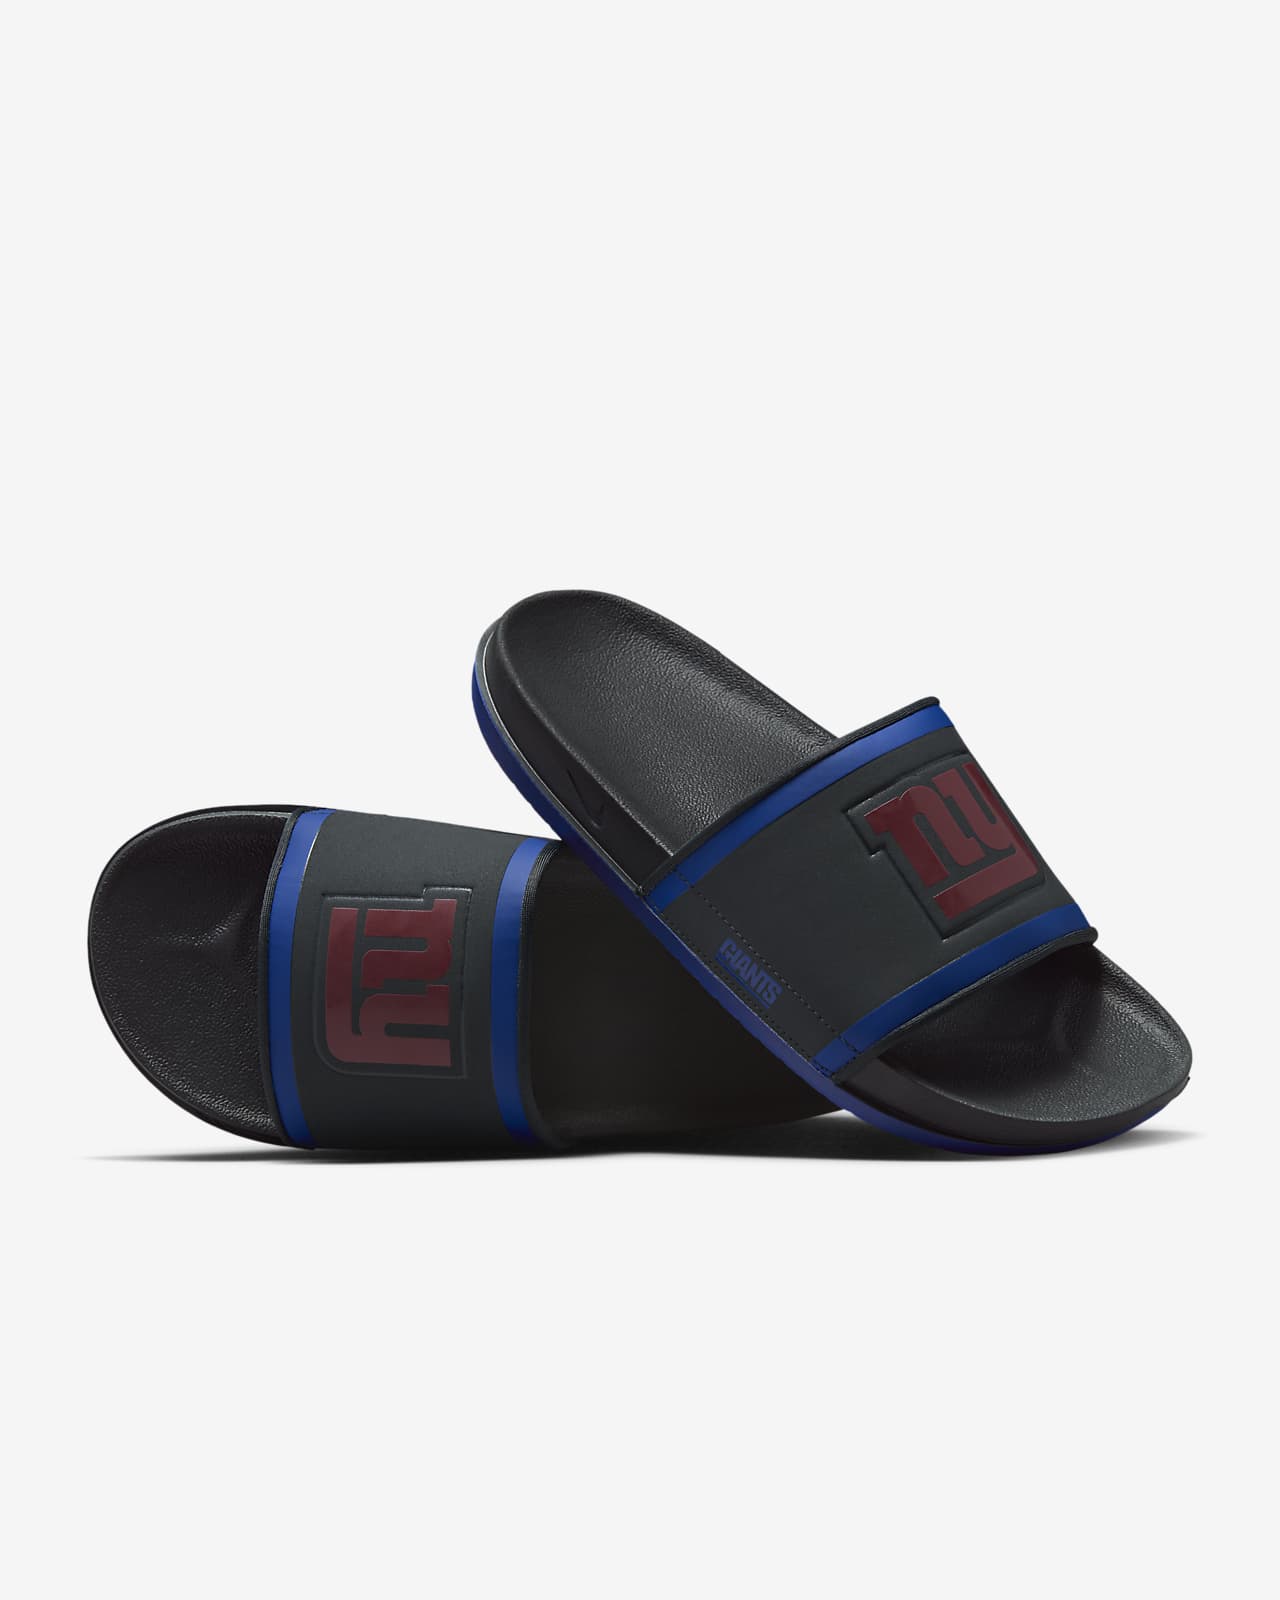 New York Giants Nike Gucci Air Force Shoes -  Worldwide  Shipping